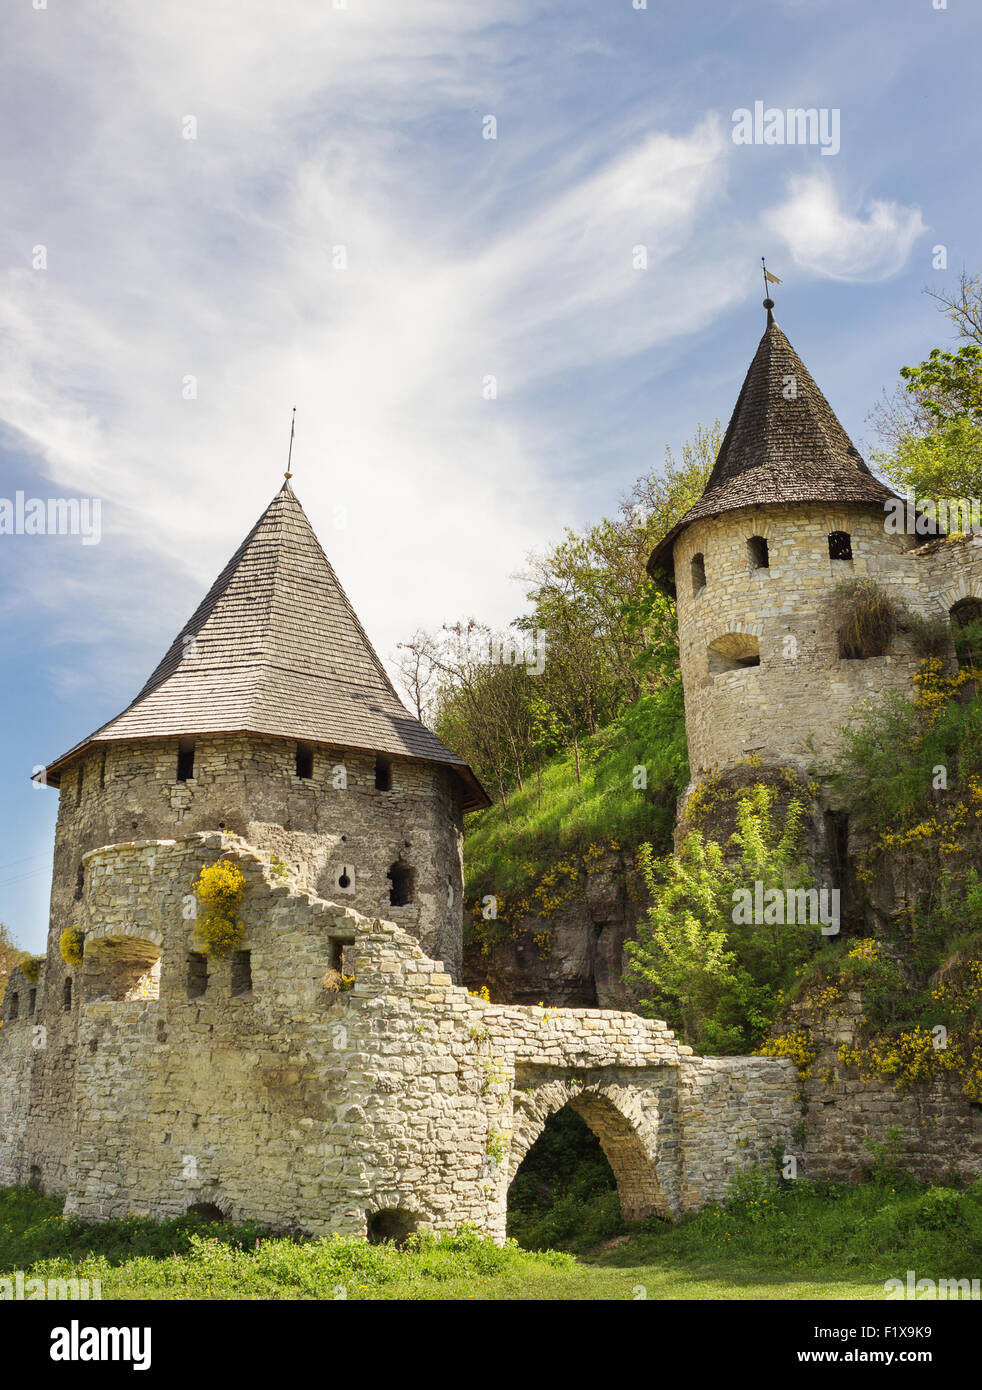 Old Tower of medieval castle. Stock Photo